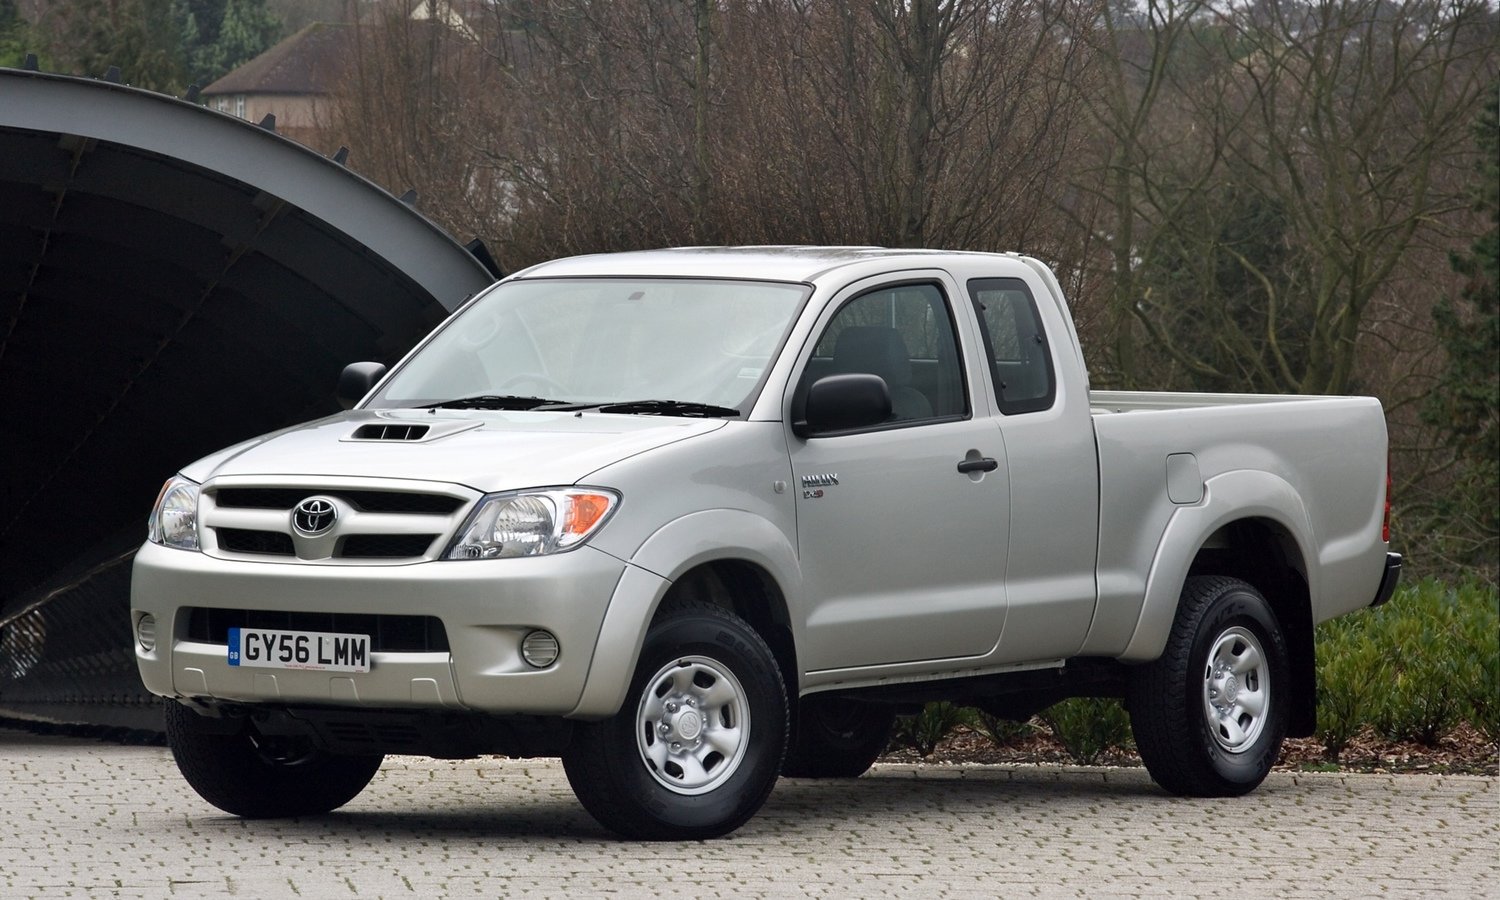 Toyota Hilux - HOODLIFT (2004 - 2015 model) (ASSISTING IN THE OPENING OF YOUR HOOD/BONNET)